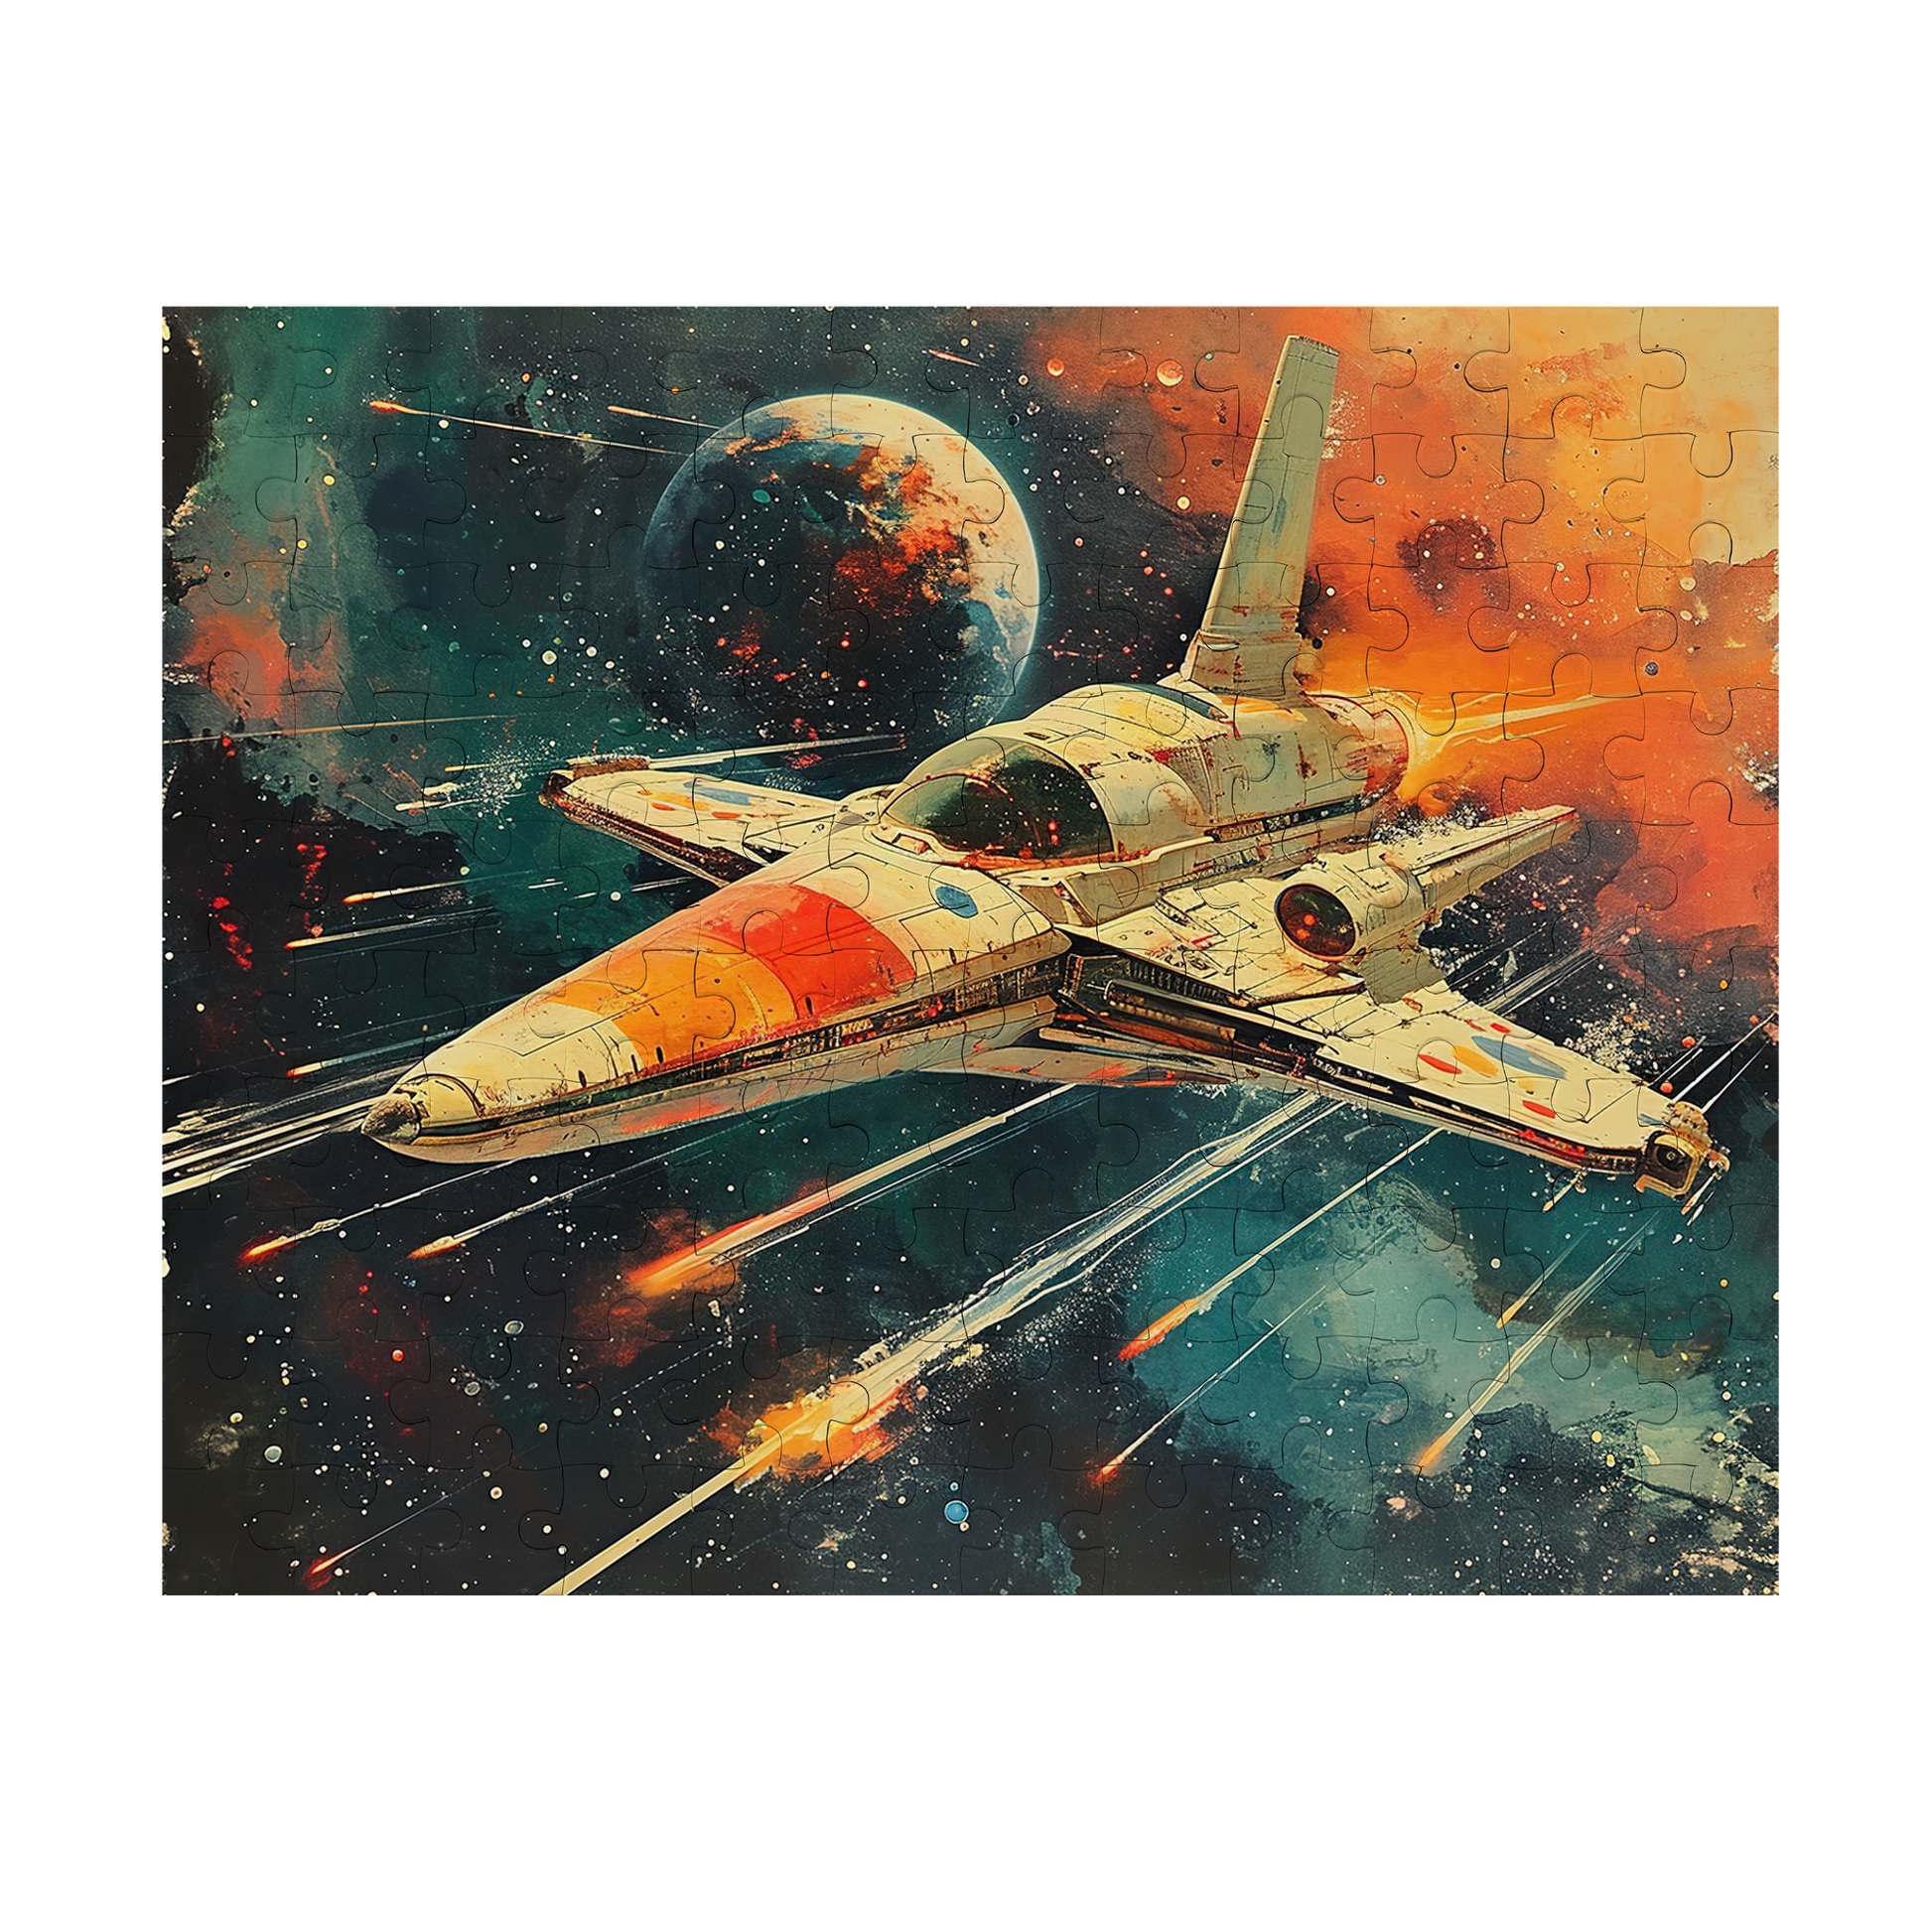 Star Fighter - Premium Jigsaw Puzzle, Vibrant, Sci-fi - Multiple Sizes Available